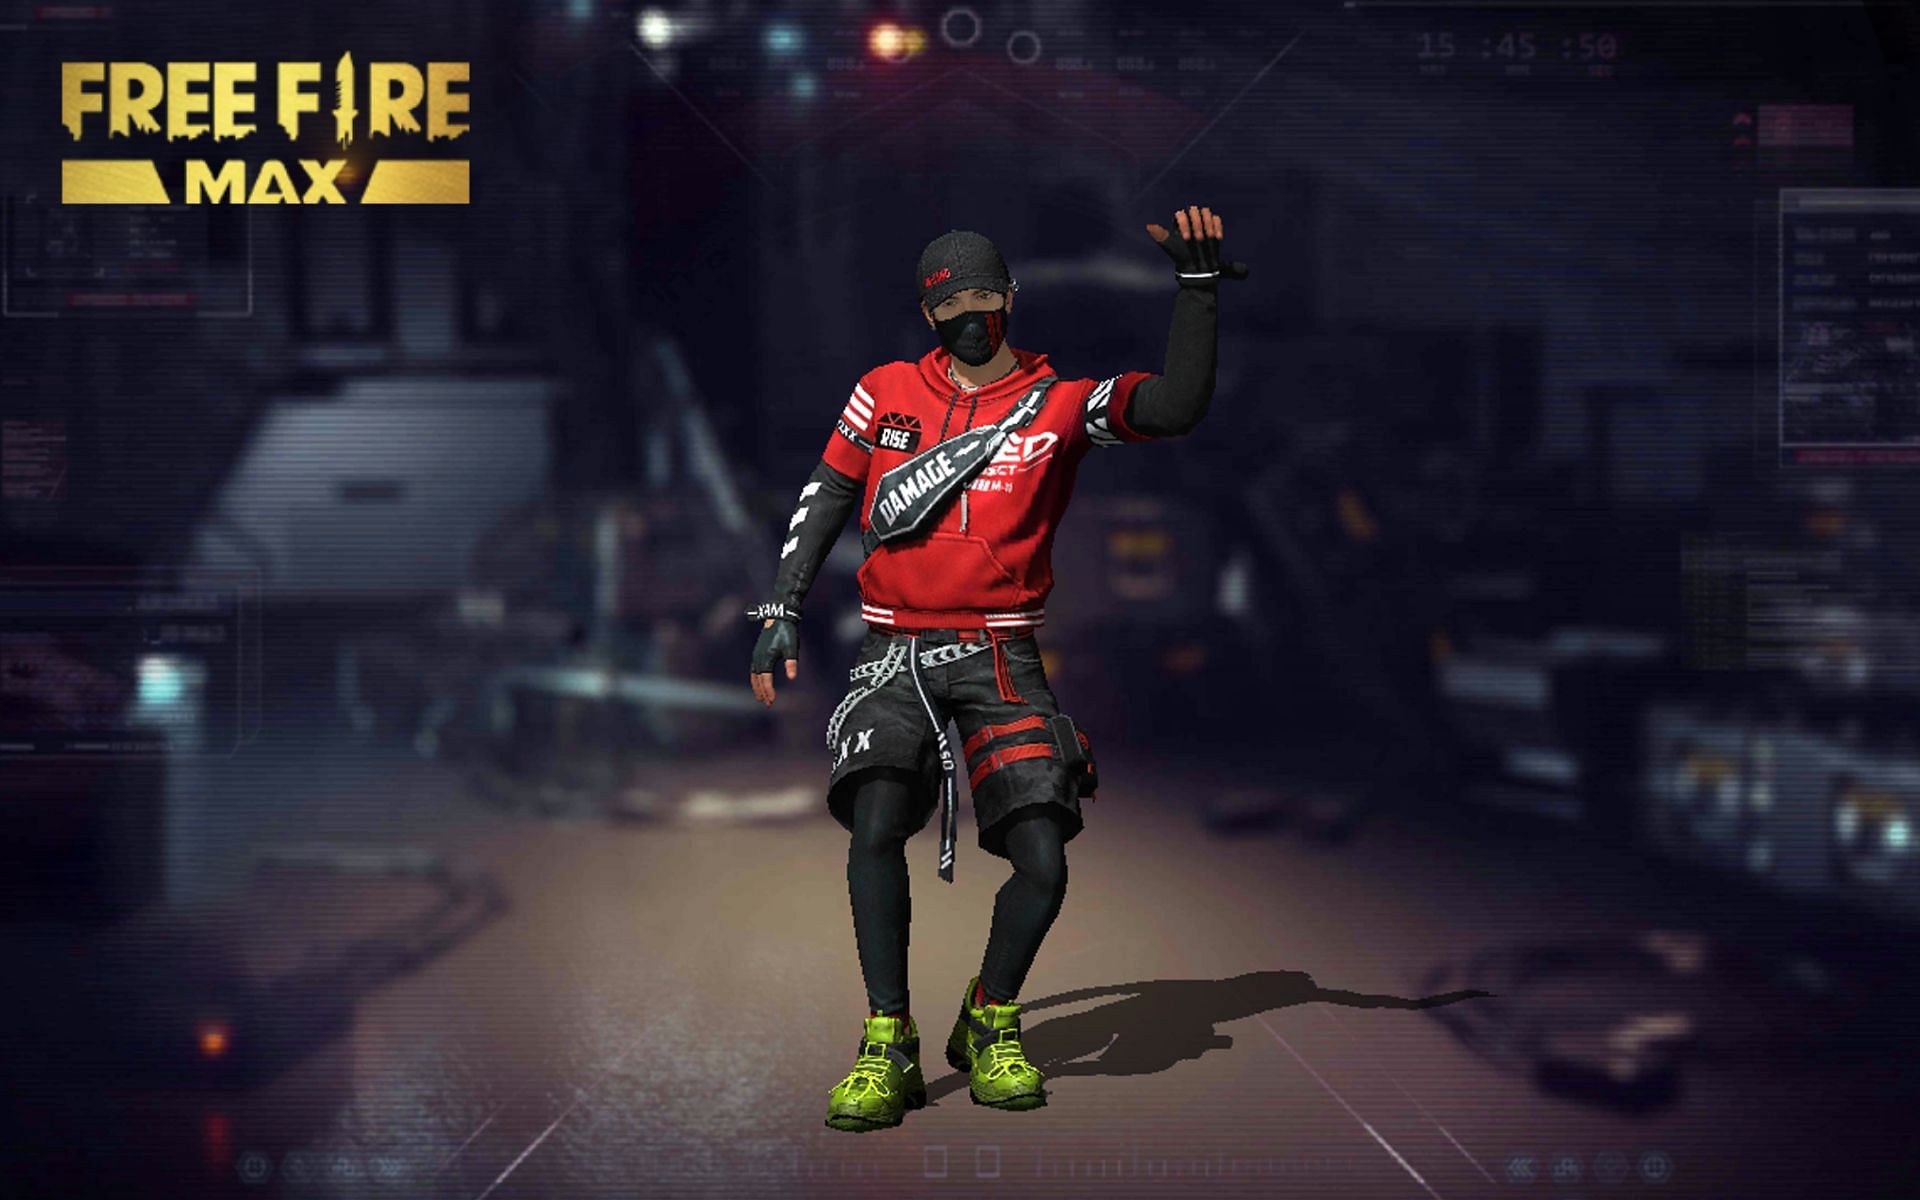 This is how the special Soul Shaking emote looks in Free Fire MAX (Image via Garena)